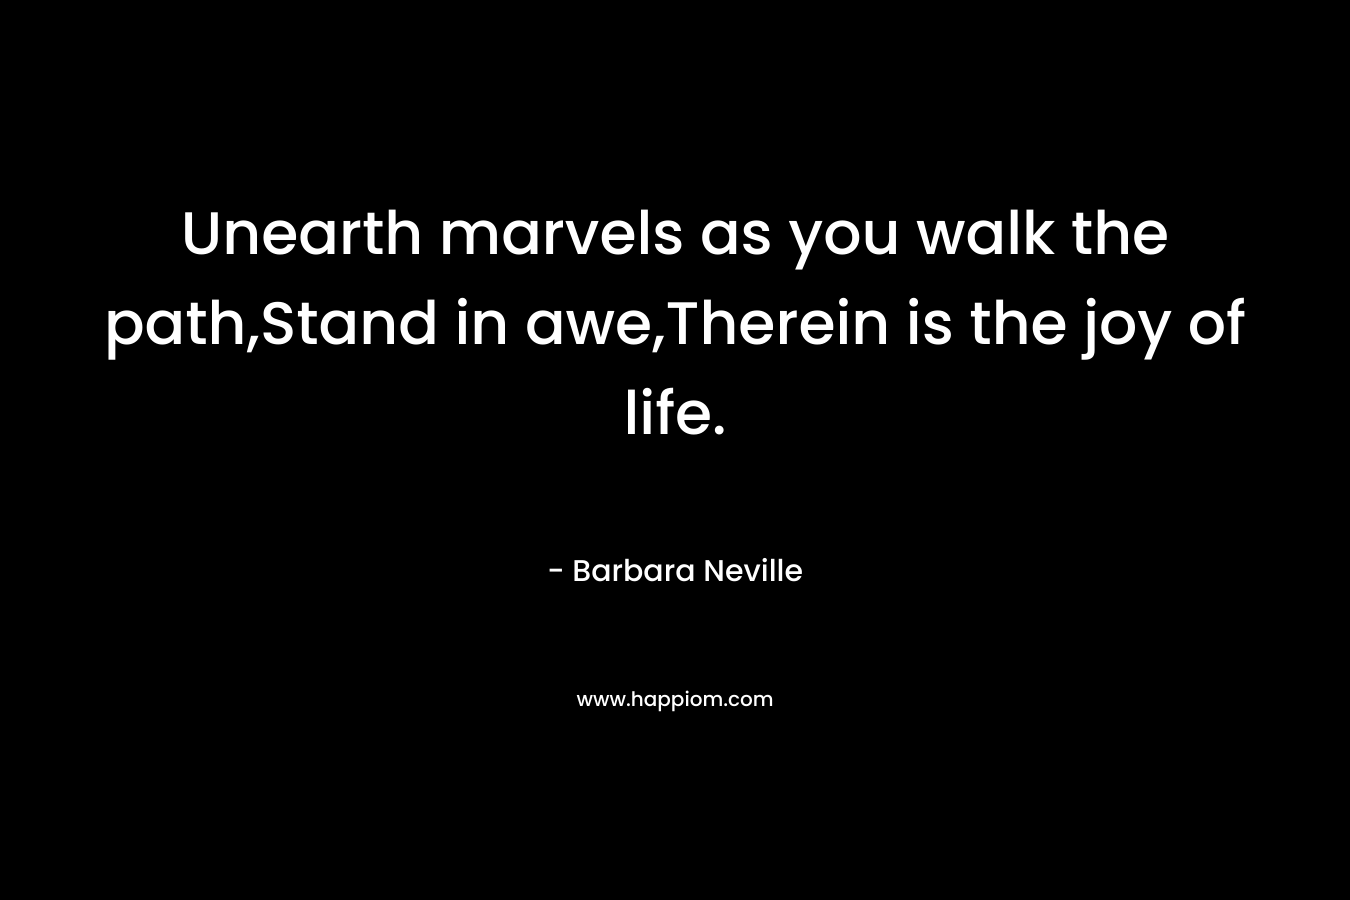 Unearth marvels as you walk the path,Stand in awe,Therein is the joy of life.